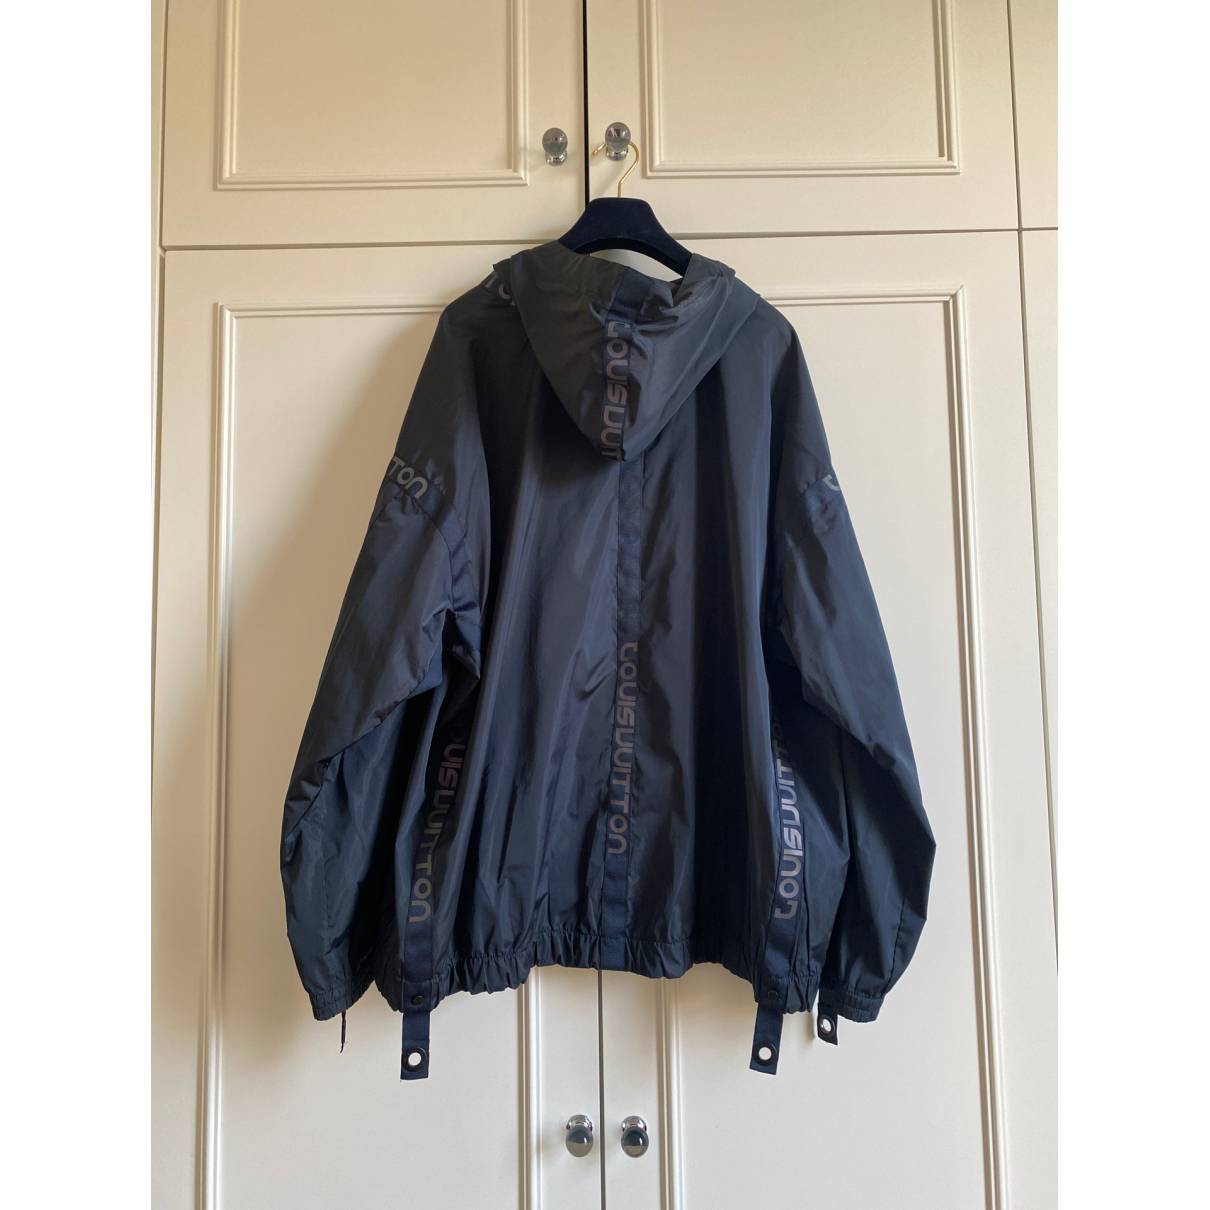 Louis Vuitton - Authenticated Jacket - Polyester Navy for Men, Good Condition